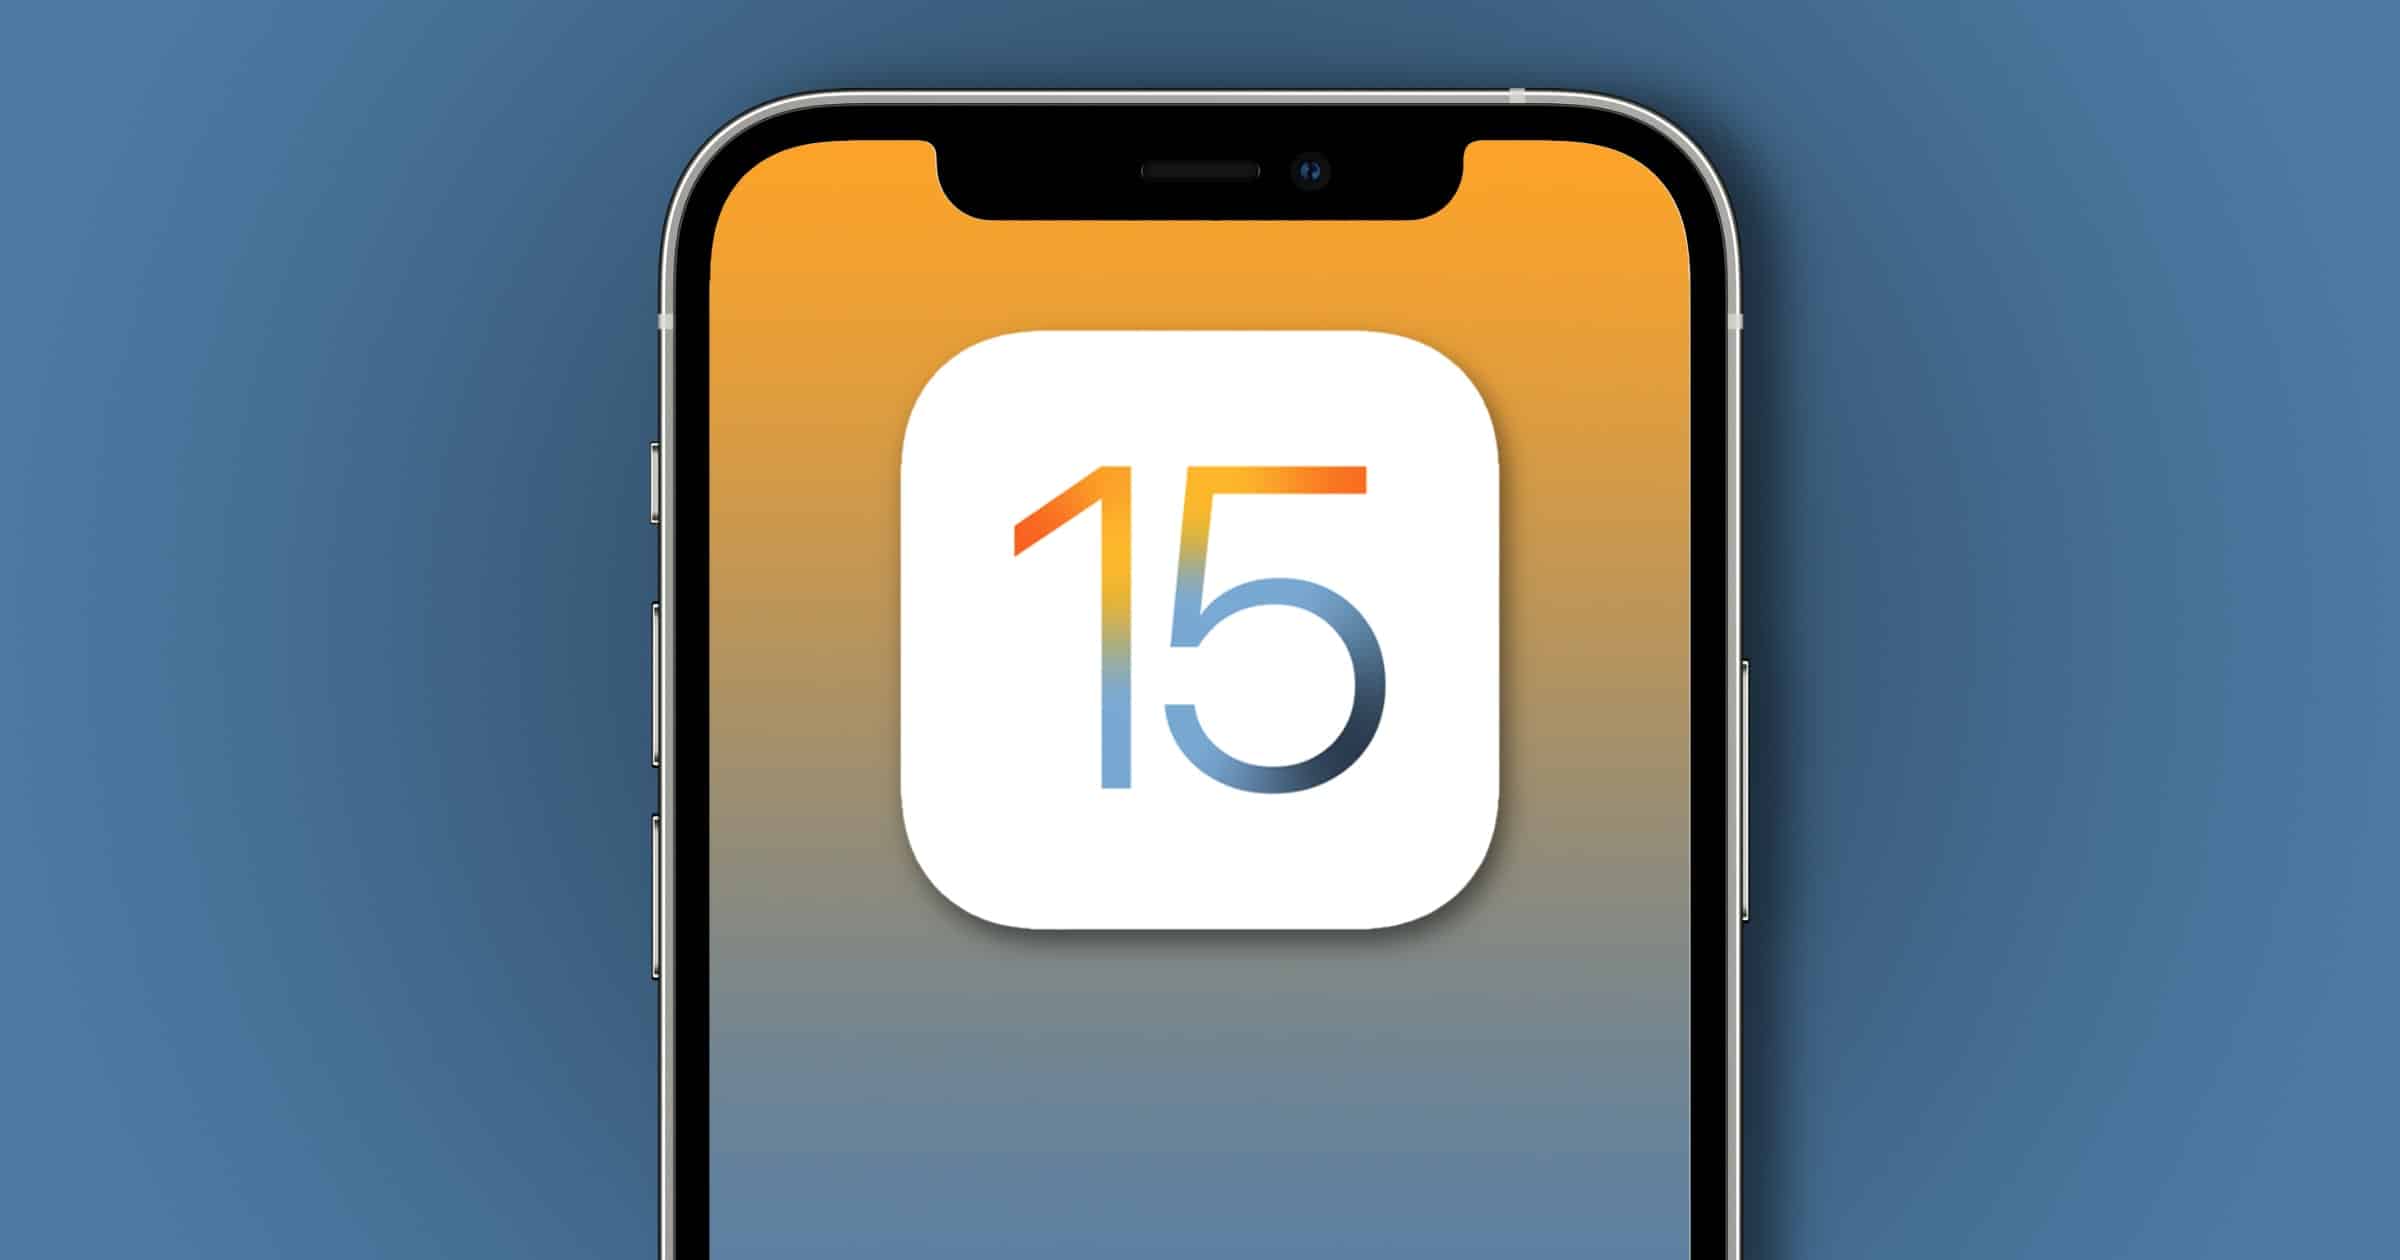 Apple Pushing Users to Upgrade From iOS 14 to iOS 15